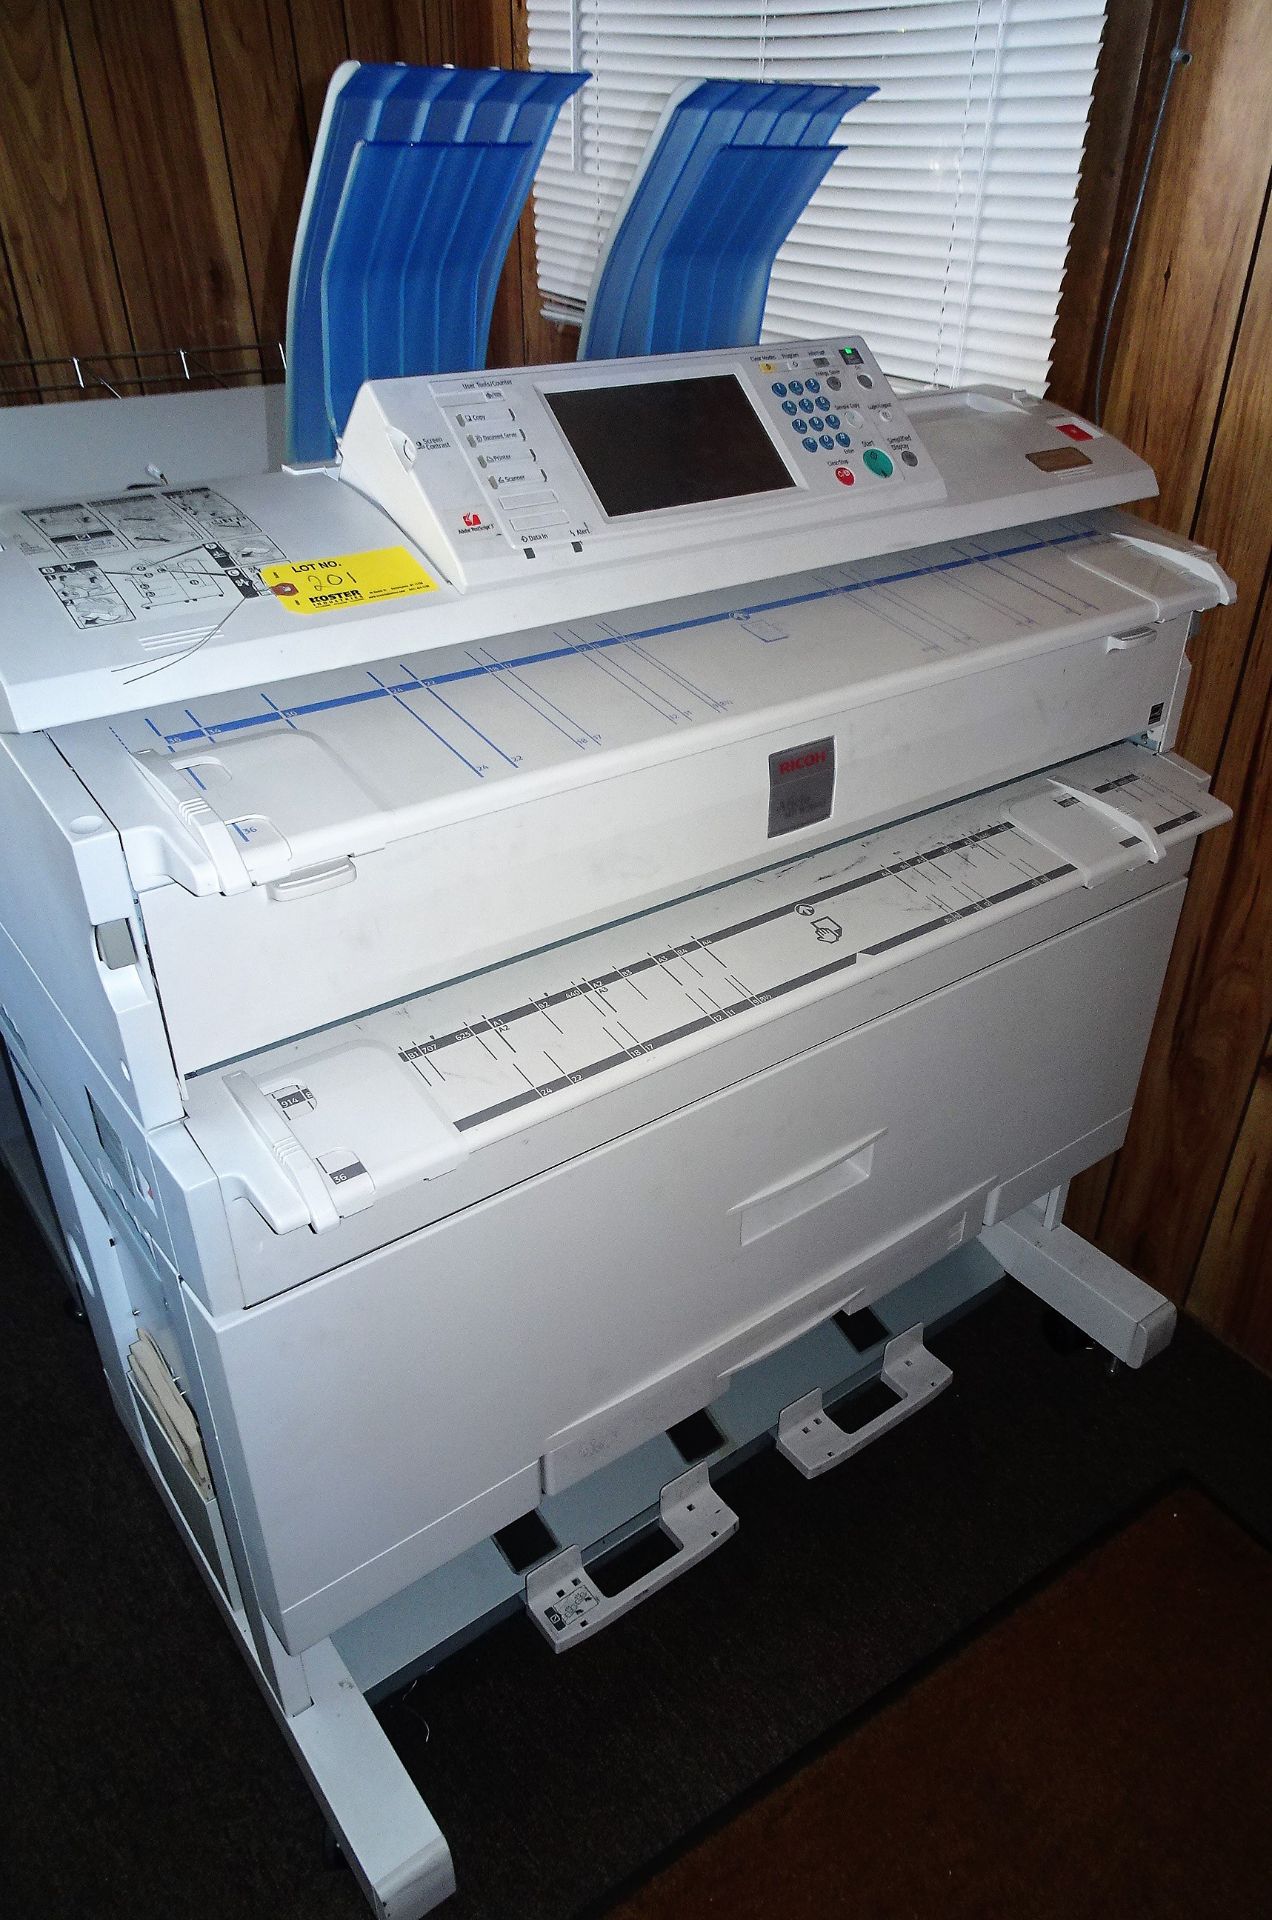 Ricoh Mdl. AFICIO MP W3600 36" Large Format Plotter Printer, with Tameran Feeding Catch Tray and